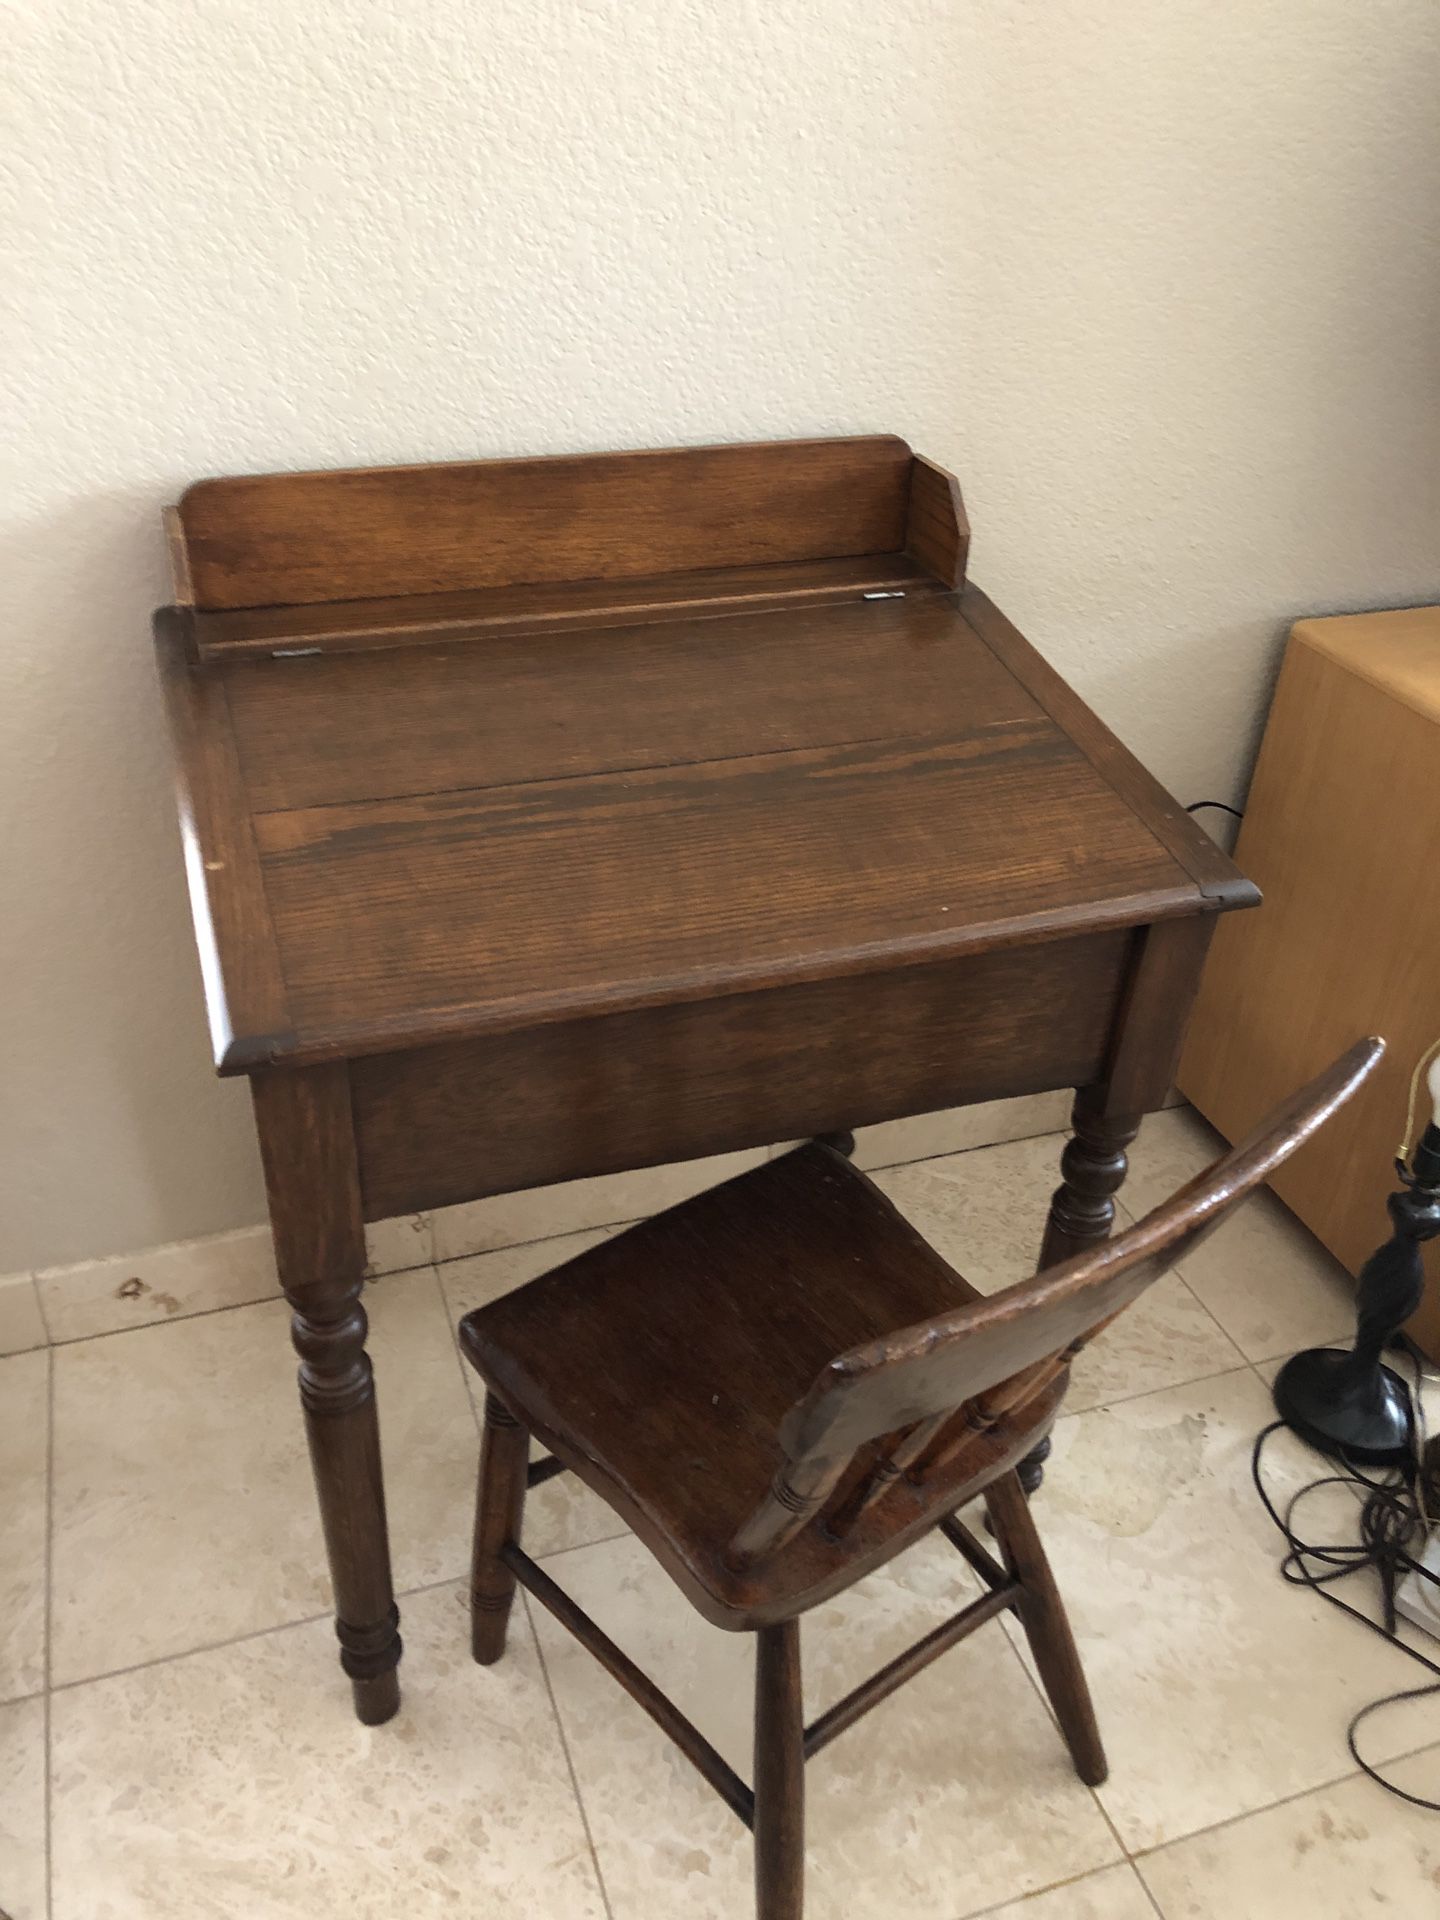 Antique School House Desk and Chair